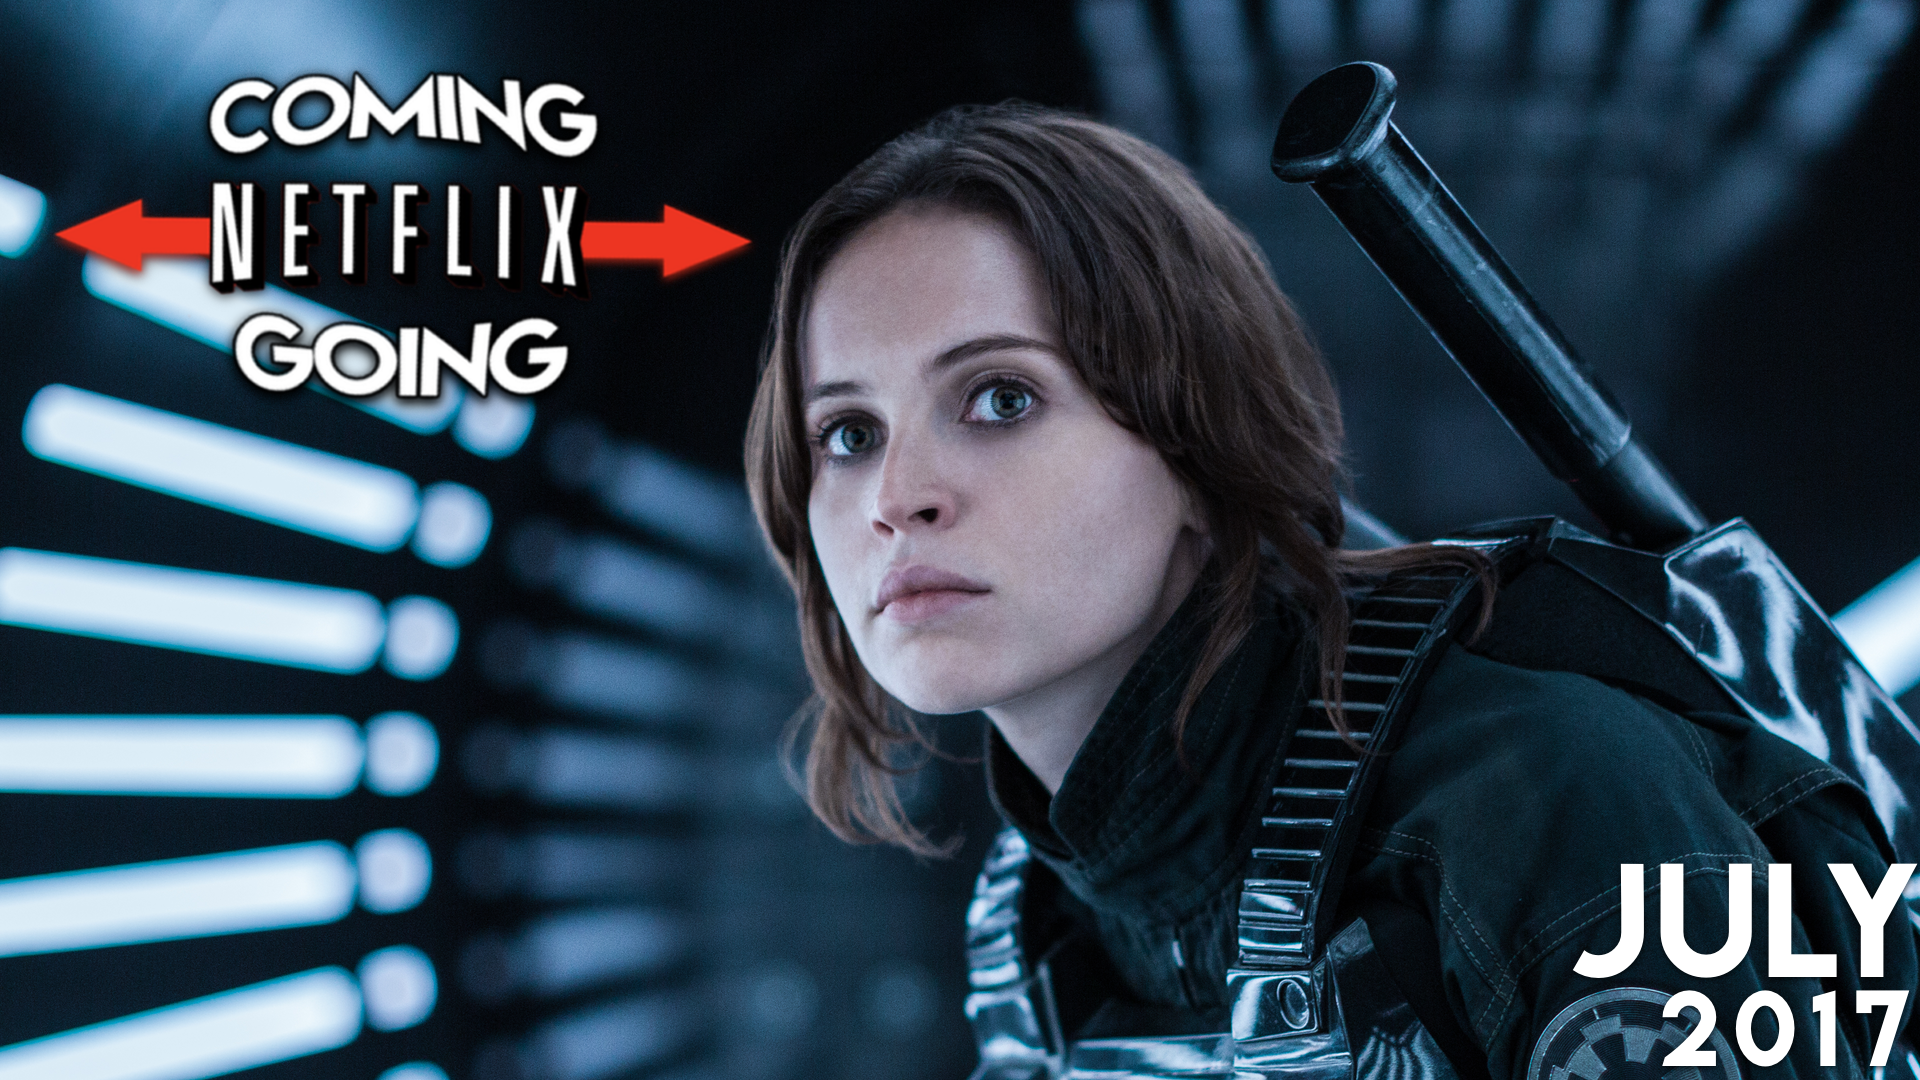 Netflix coming going july 2017 rogue one